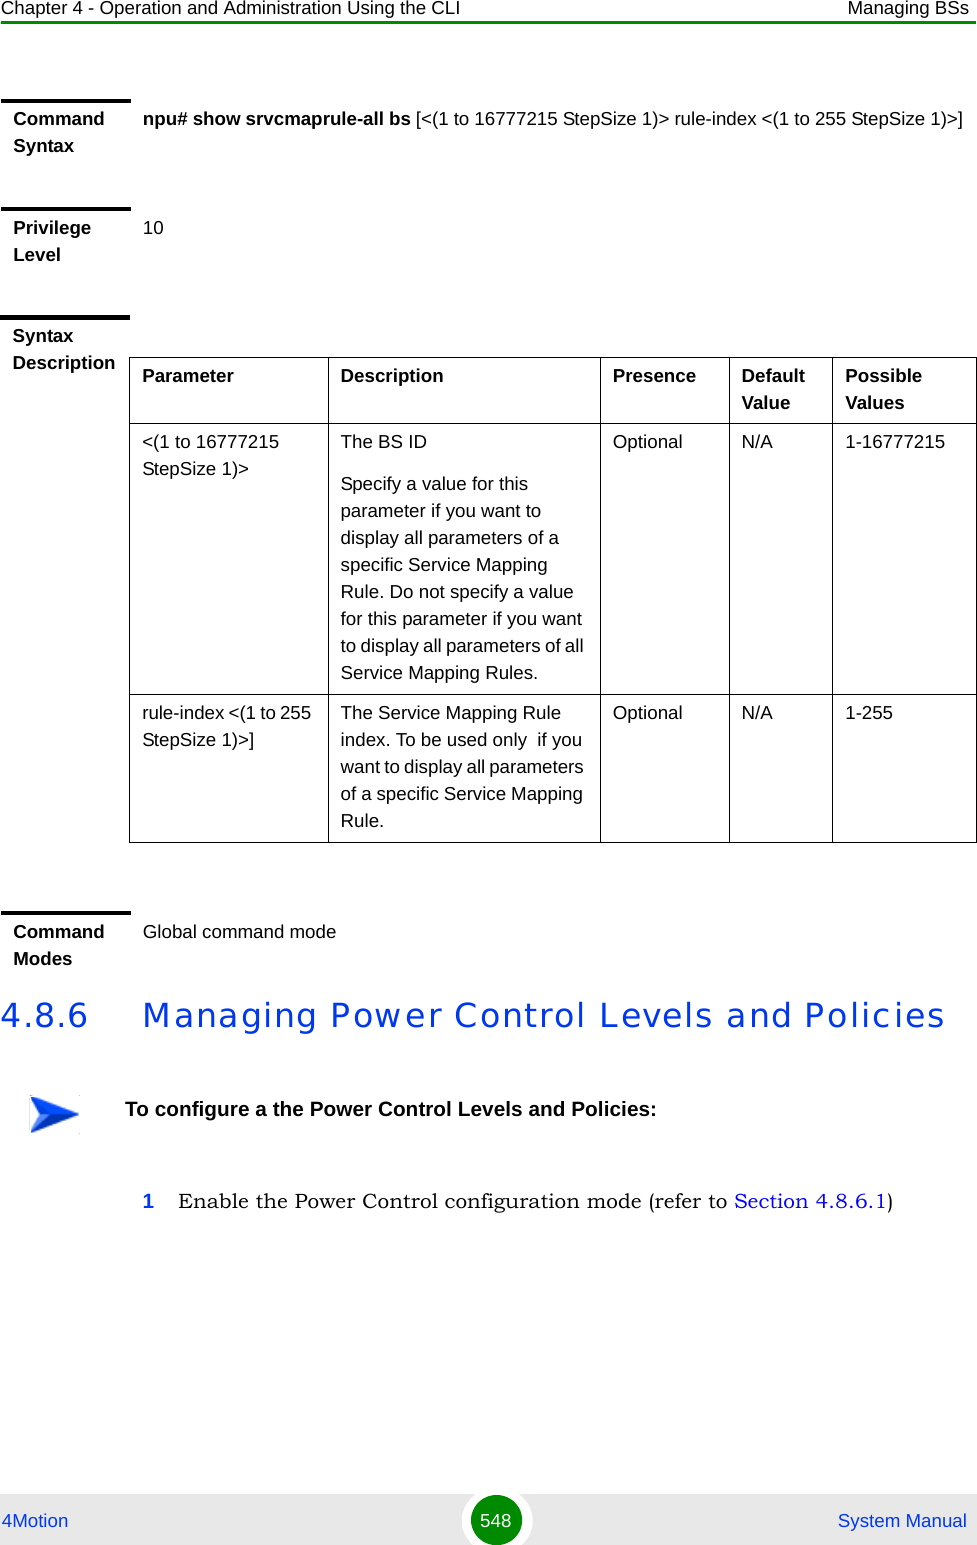 Chapter 4 - Operation and Administration Using the CLI Managing BSs4Motion 548  System Manual4.8.6 Managing Power Control Levels and Policies1Enable the Power Control configuration mode (refer to Section 4.8.6.1)Command Syntaxnpu# show srvcmaprule-all bs [&lt;(1 to 16777215 StepSize 1)&gt; rule-index &lt;(1 to 255 StepSize 1)&gt;]Privilege Level10Syntax Description Parameter Description Presence Default ValuePossible Values&lt;(1 to 16777215 StepSize 1)&gt;The BS ID Specify a value for this parameter if you want to display all parameters of a specific Service Mapping Rule. Do not specify a value for this parameter if you want to display all parameters of all Service Mapping Rules.Optional N/A 1-16777215rule-index &lt;(1 to 255 StepSize 1)&gt;]The Service Mapping Rule index. To be used only  if you want to display all parameters of a specific Service Mapping Rule.Optional N/A 1-255Command ModesGlobal command modeTo configure a the Power Control Levels and Policies: